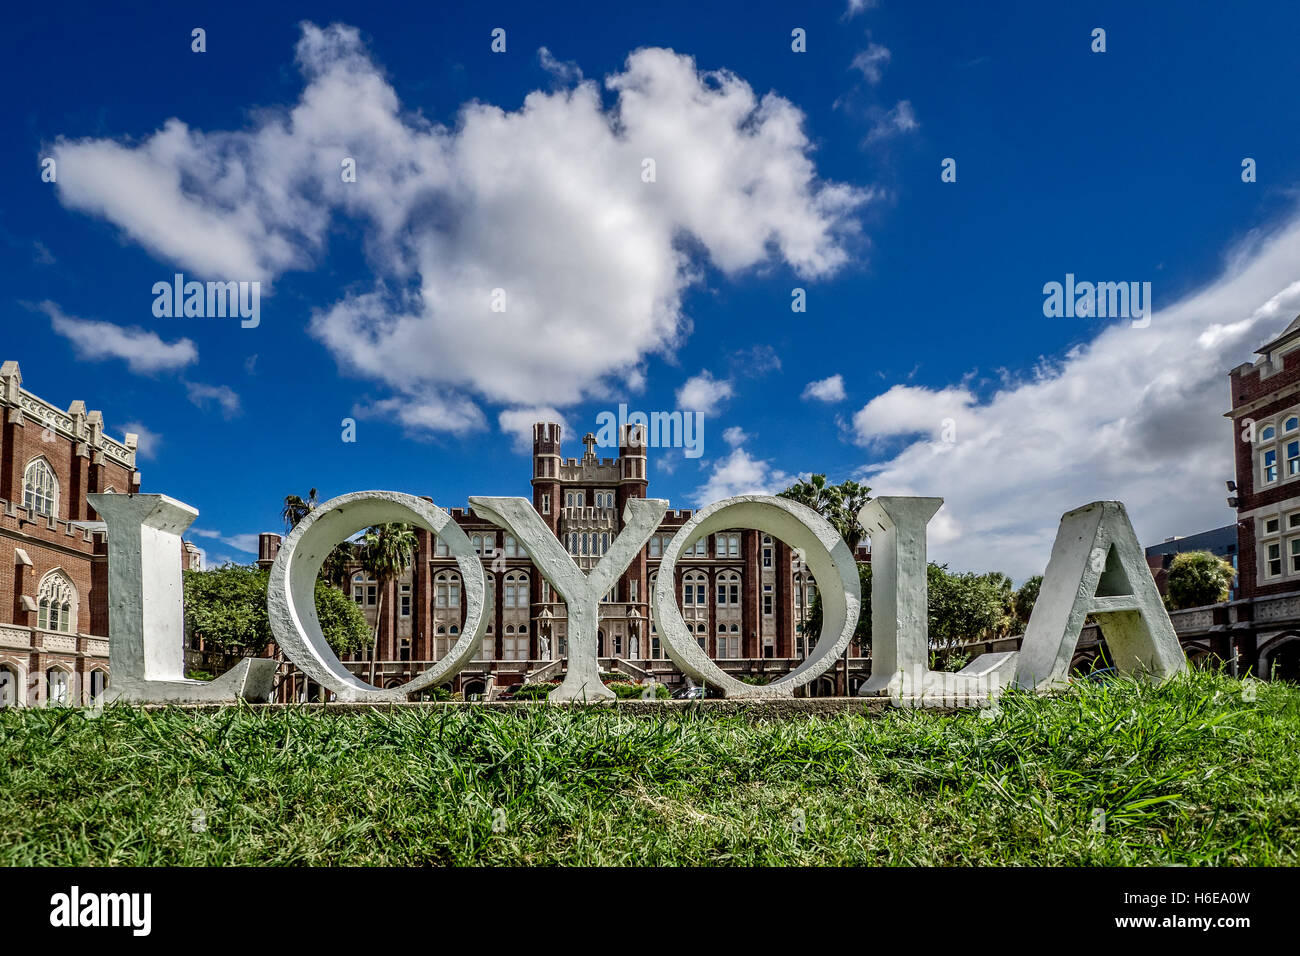 Loyola university established as a college in 1904 in New Orleans LA Stock Photo